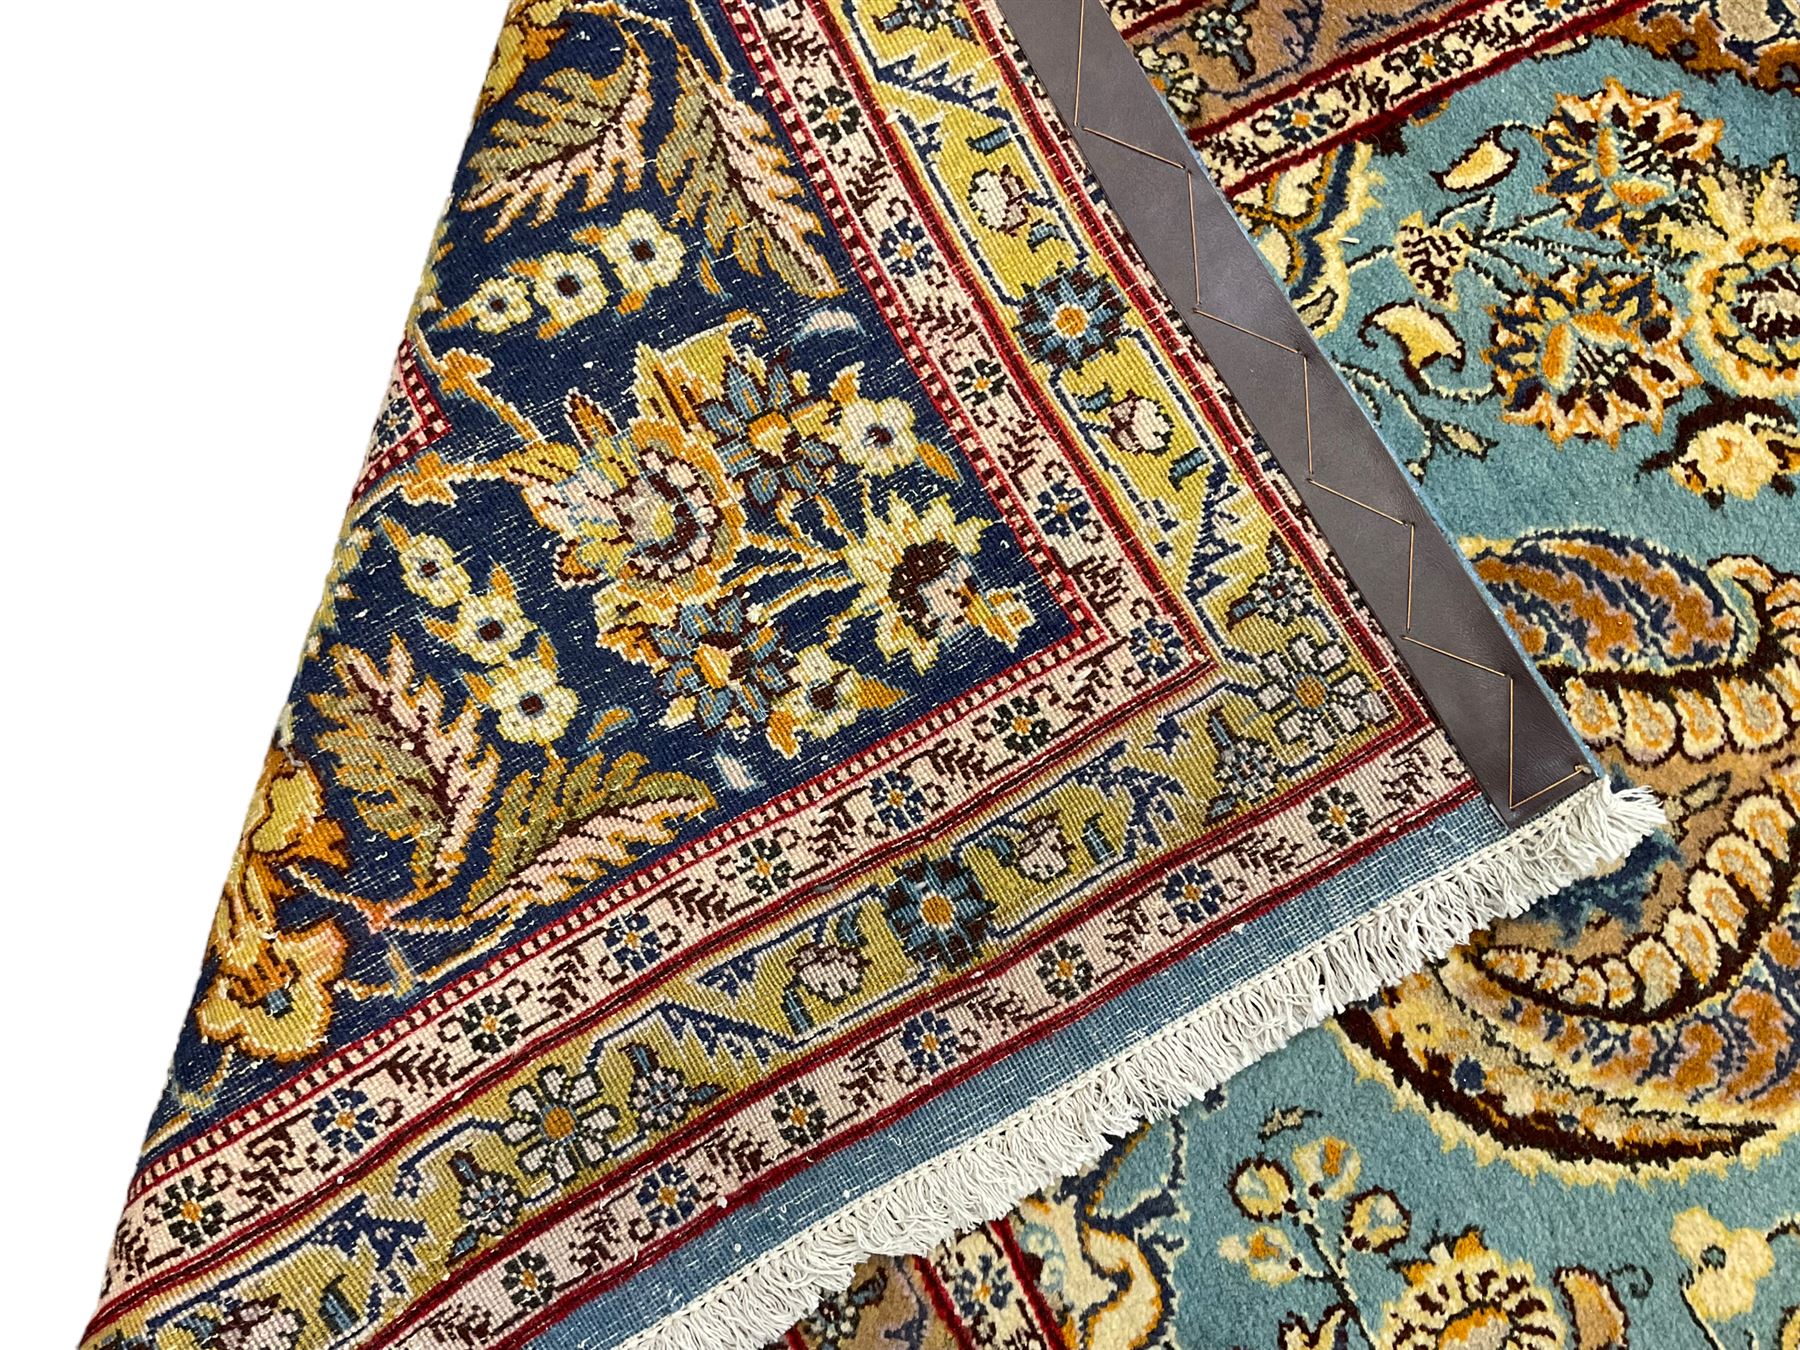 Central Persian Qum pale blue ground rug - Image 5 of 6